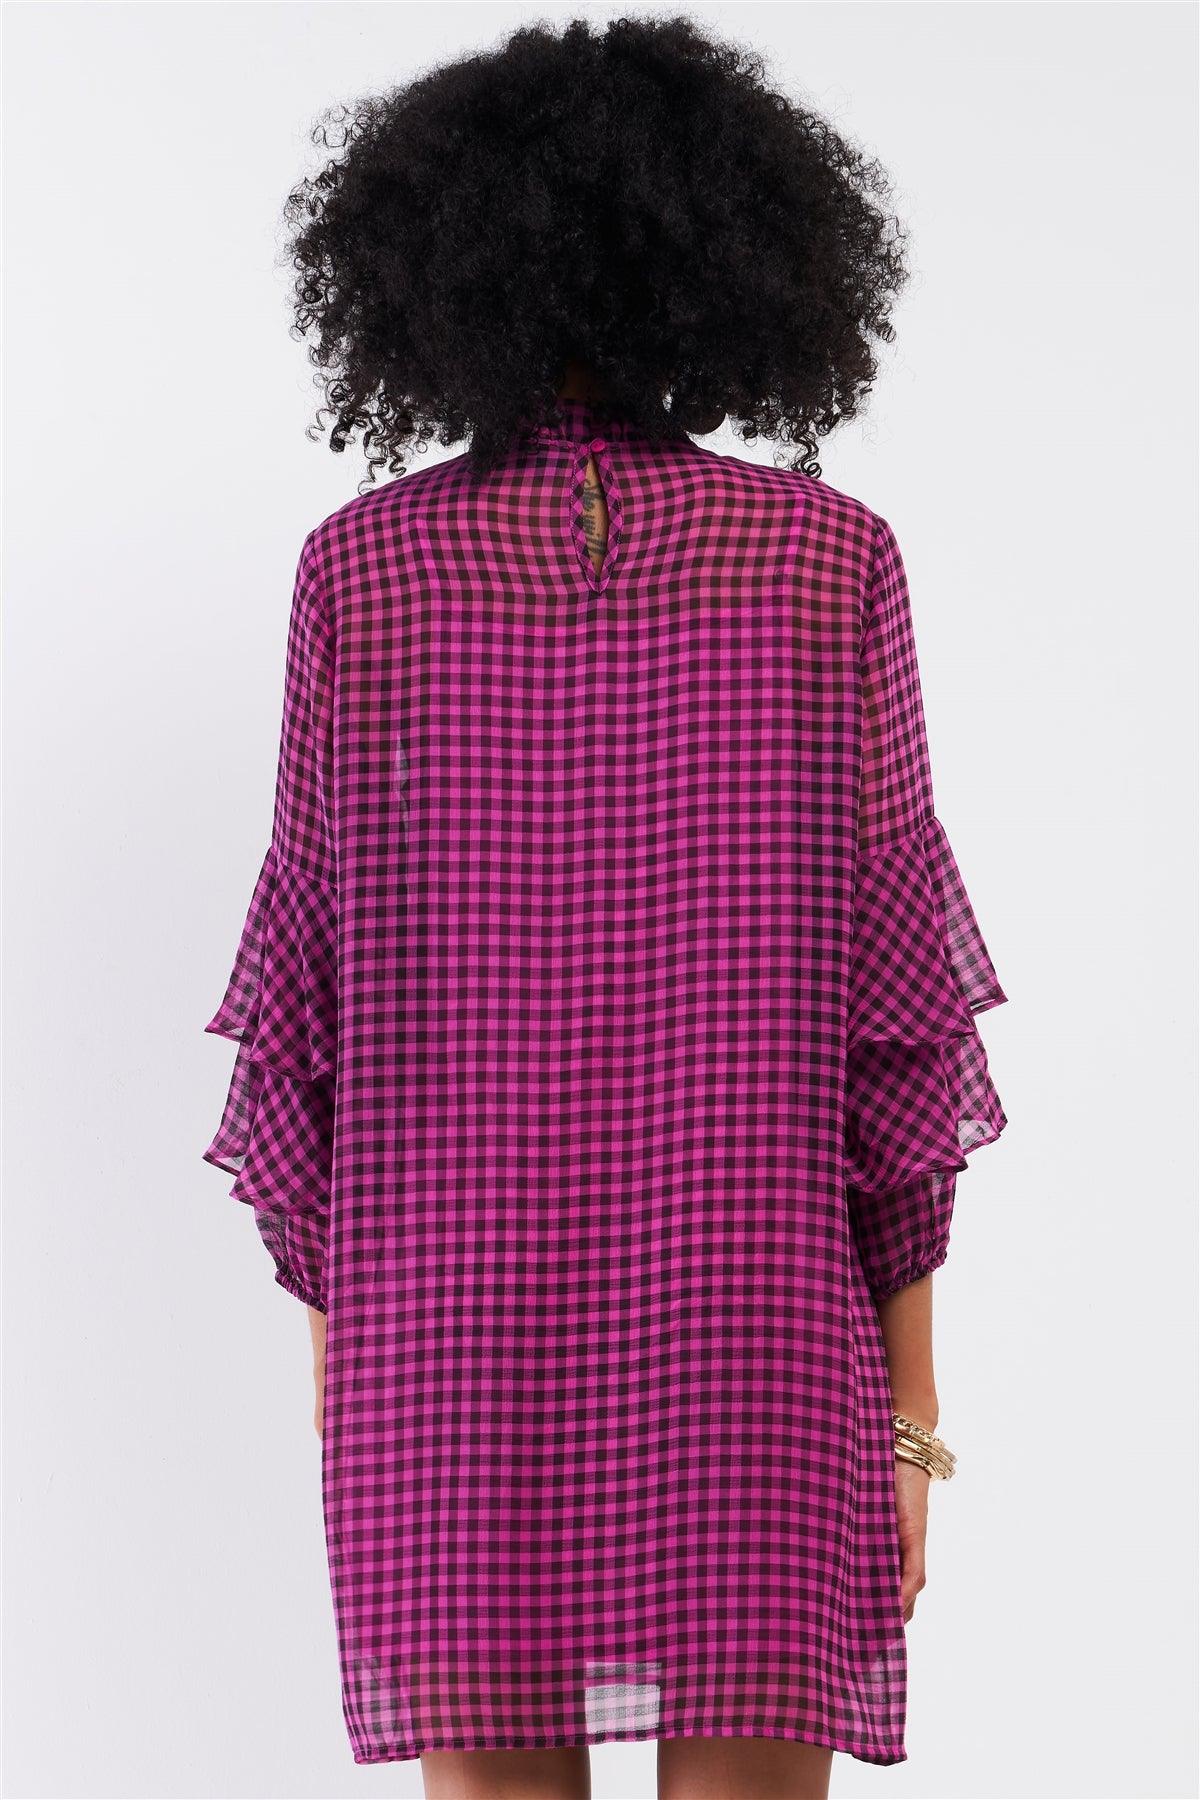 Black & Pink Checkered Print Relaxed Frill Mock Neck Layered Flare Sleeve Detail Mini Dress /2-2-2